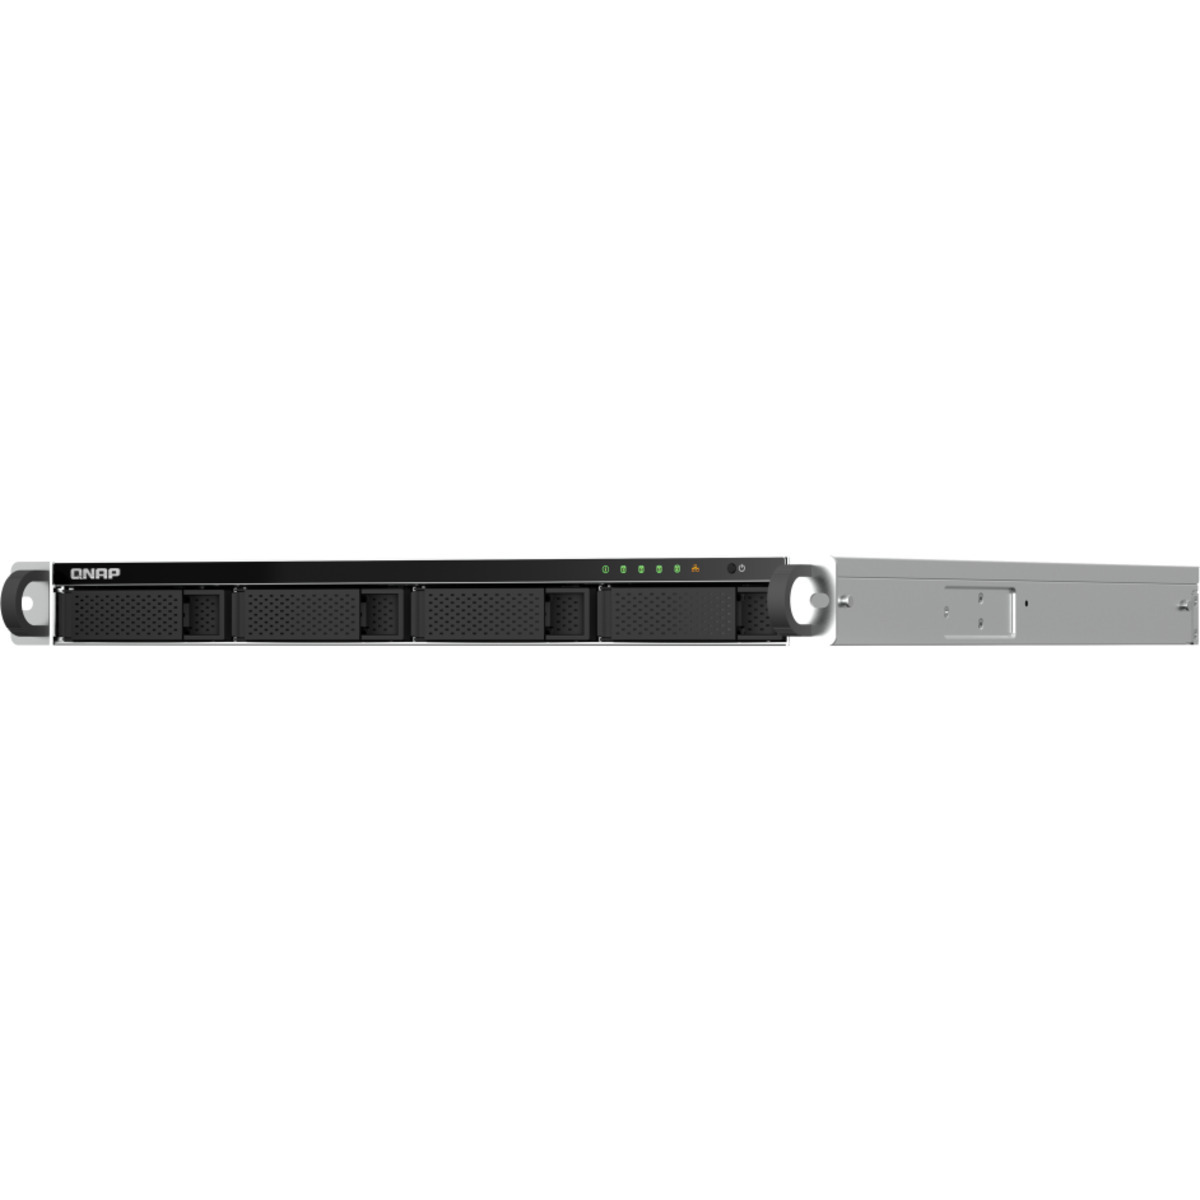 buy $3450 QNAP TS-464U-RP 32tb RackMount NAS - Network Attached Storage Device 4x8000gb Samsung 870 QVO MZ-77Q8T0 2.5 560/530MB/s SATA 6Gb/s SSD CONSUMER Class Drives Installed - Burn-In Tested - ON SALE - nas headquarters buy network attached storage server device das new raid-5 free shipping simply usa TS-464U-RP